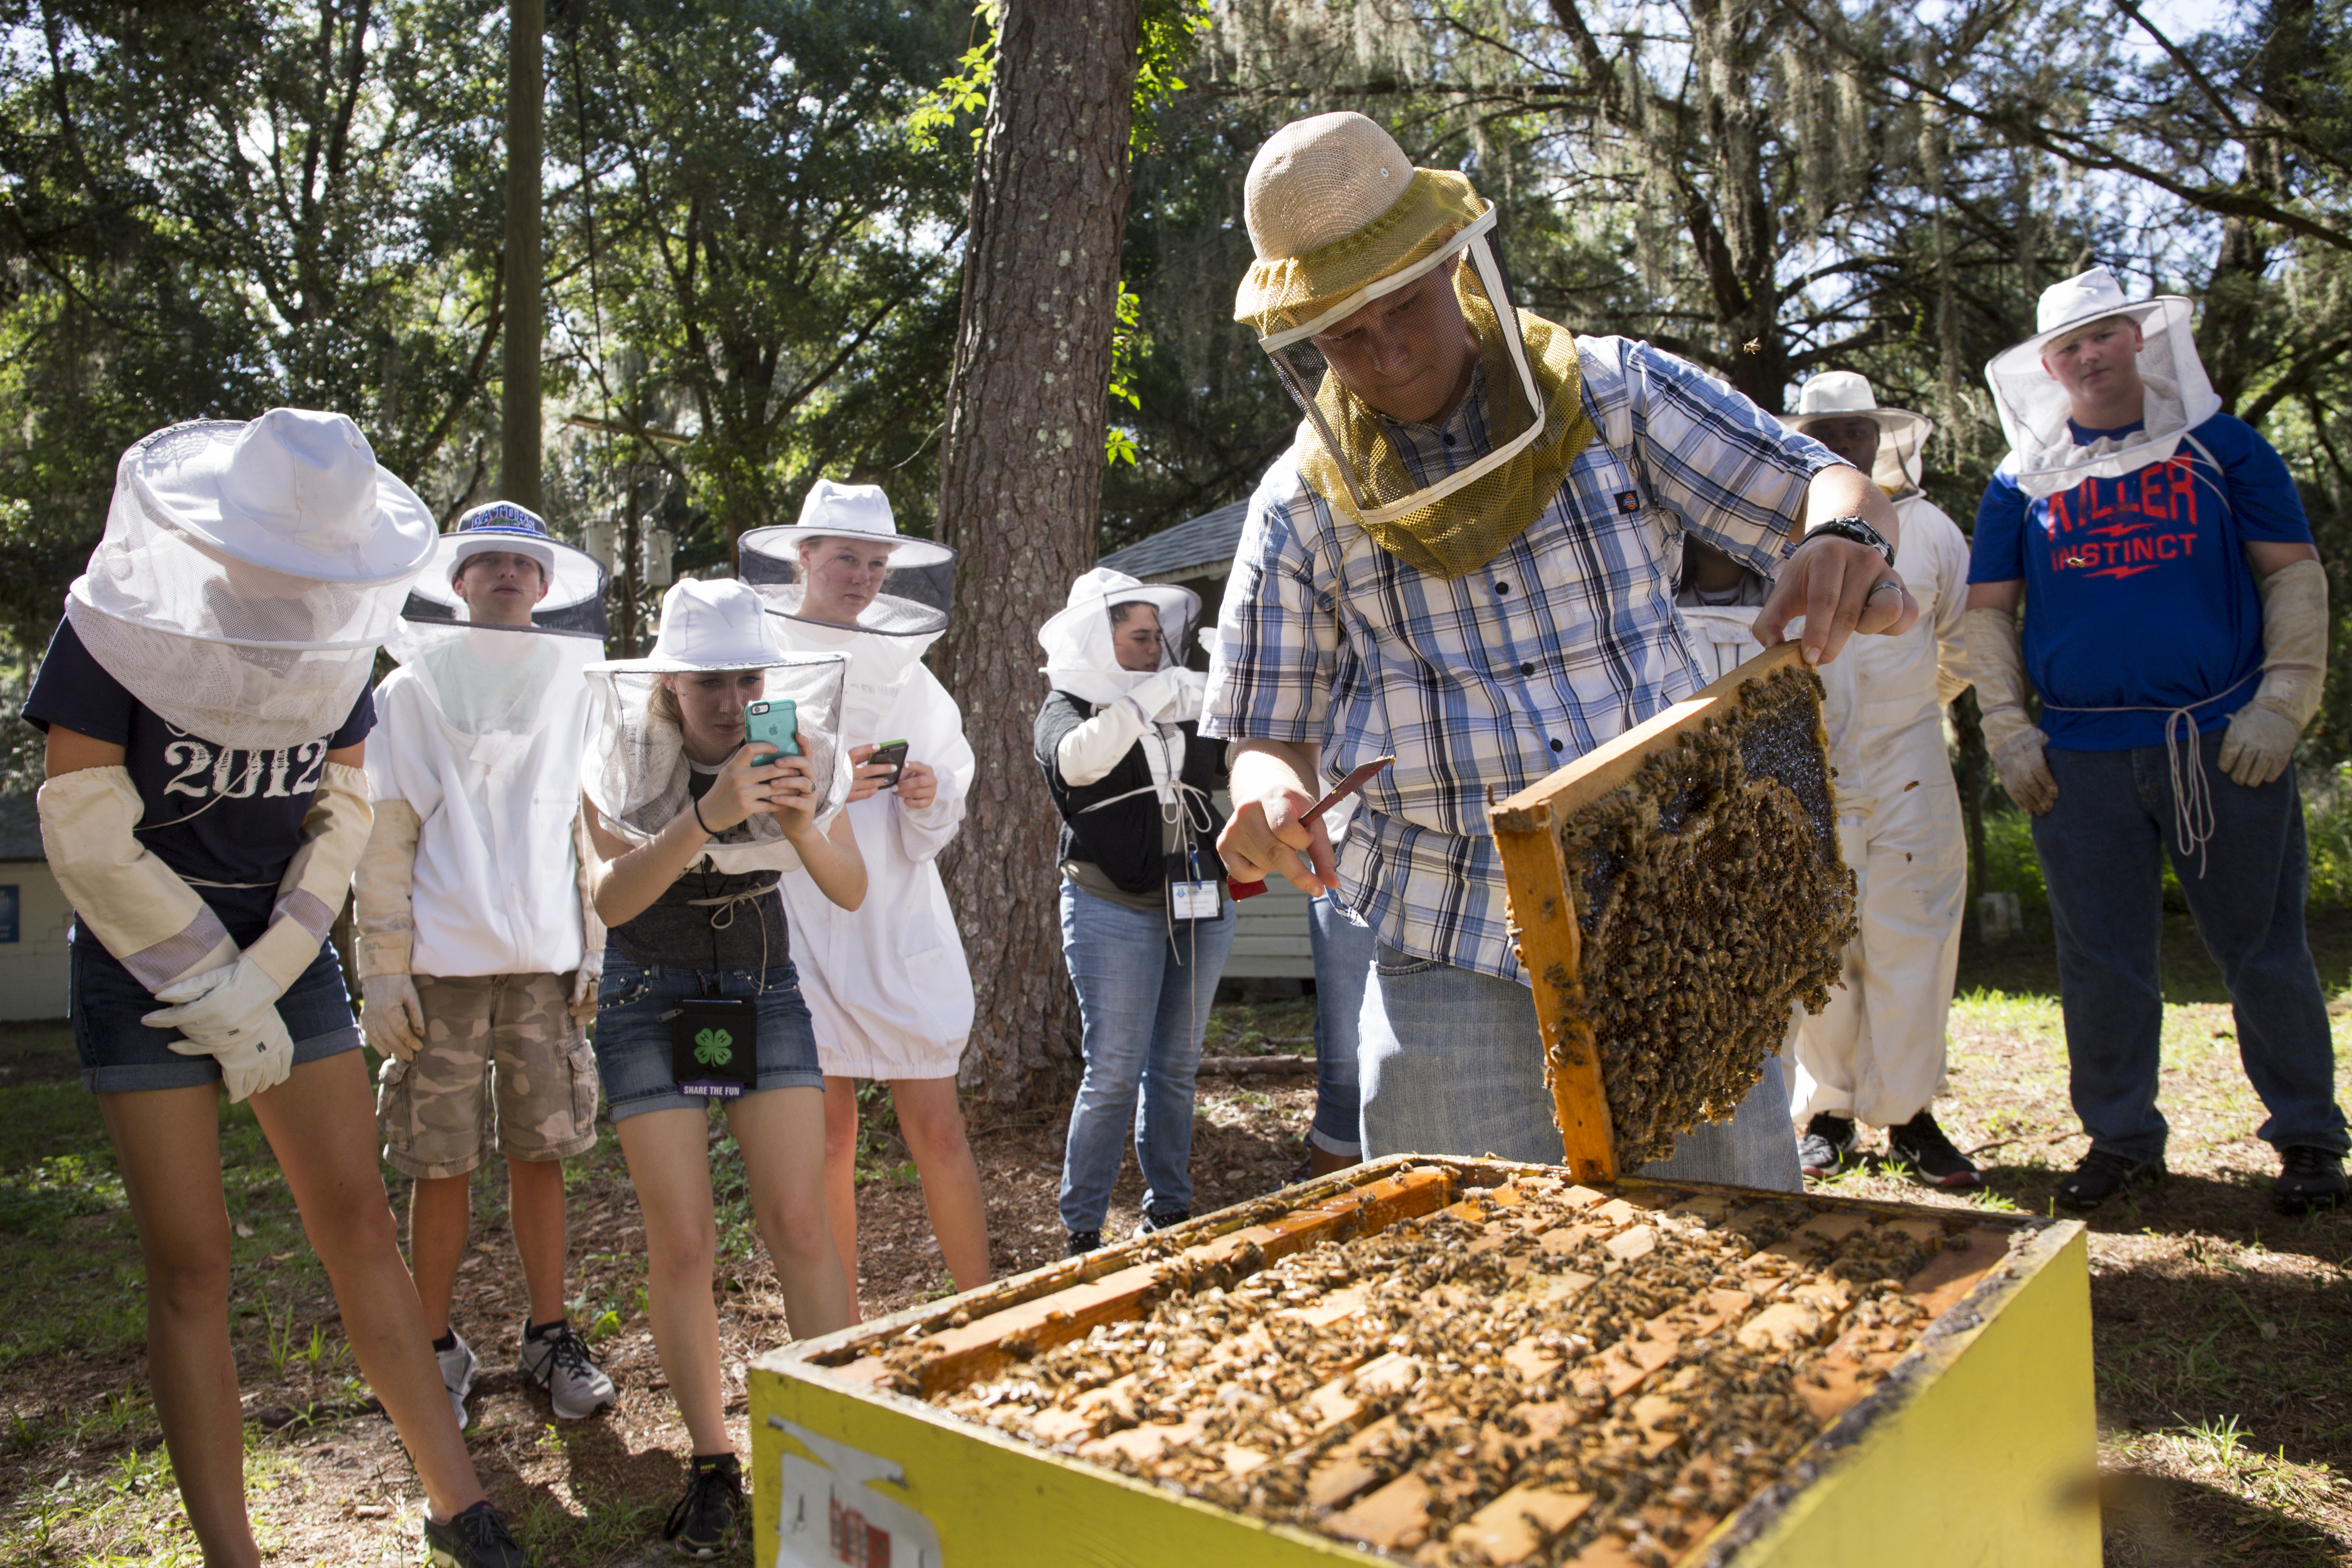 Students watching instructor handle honey bees